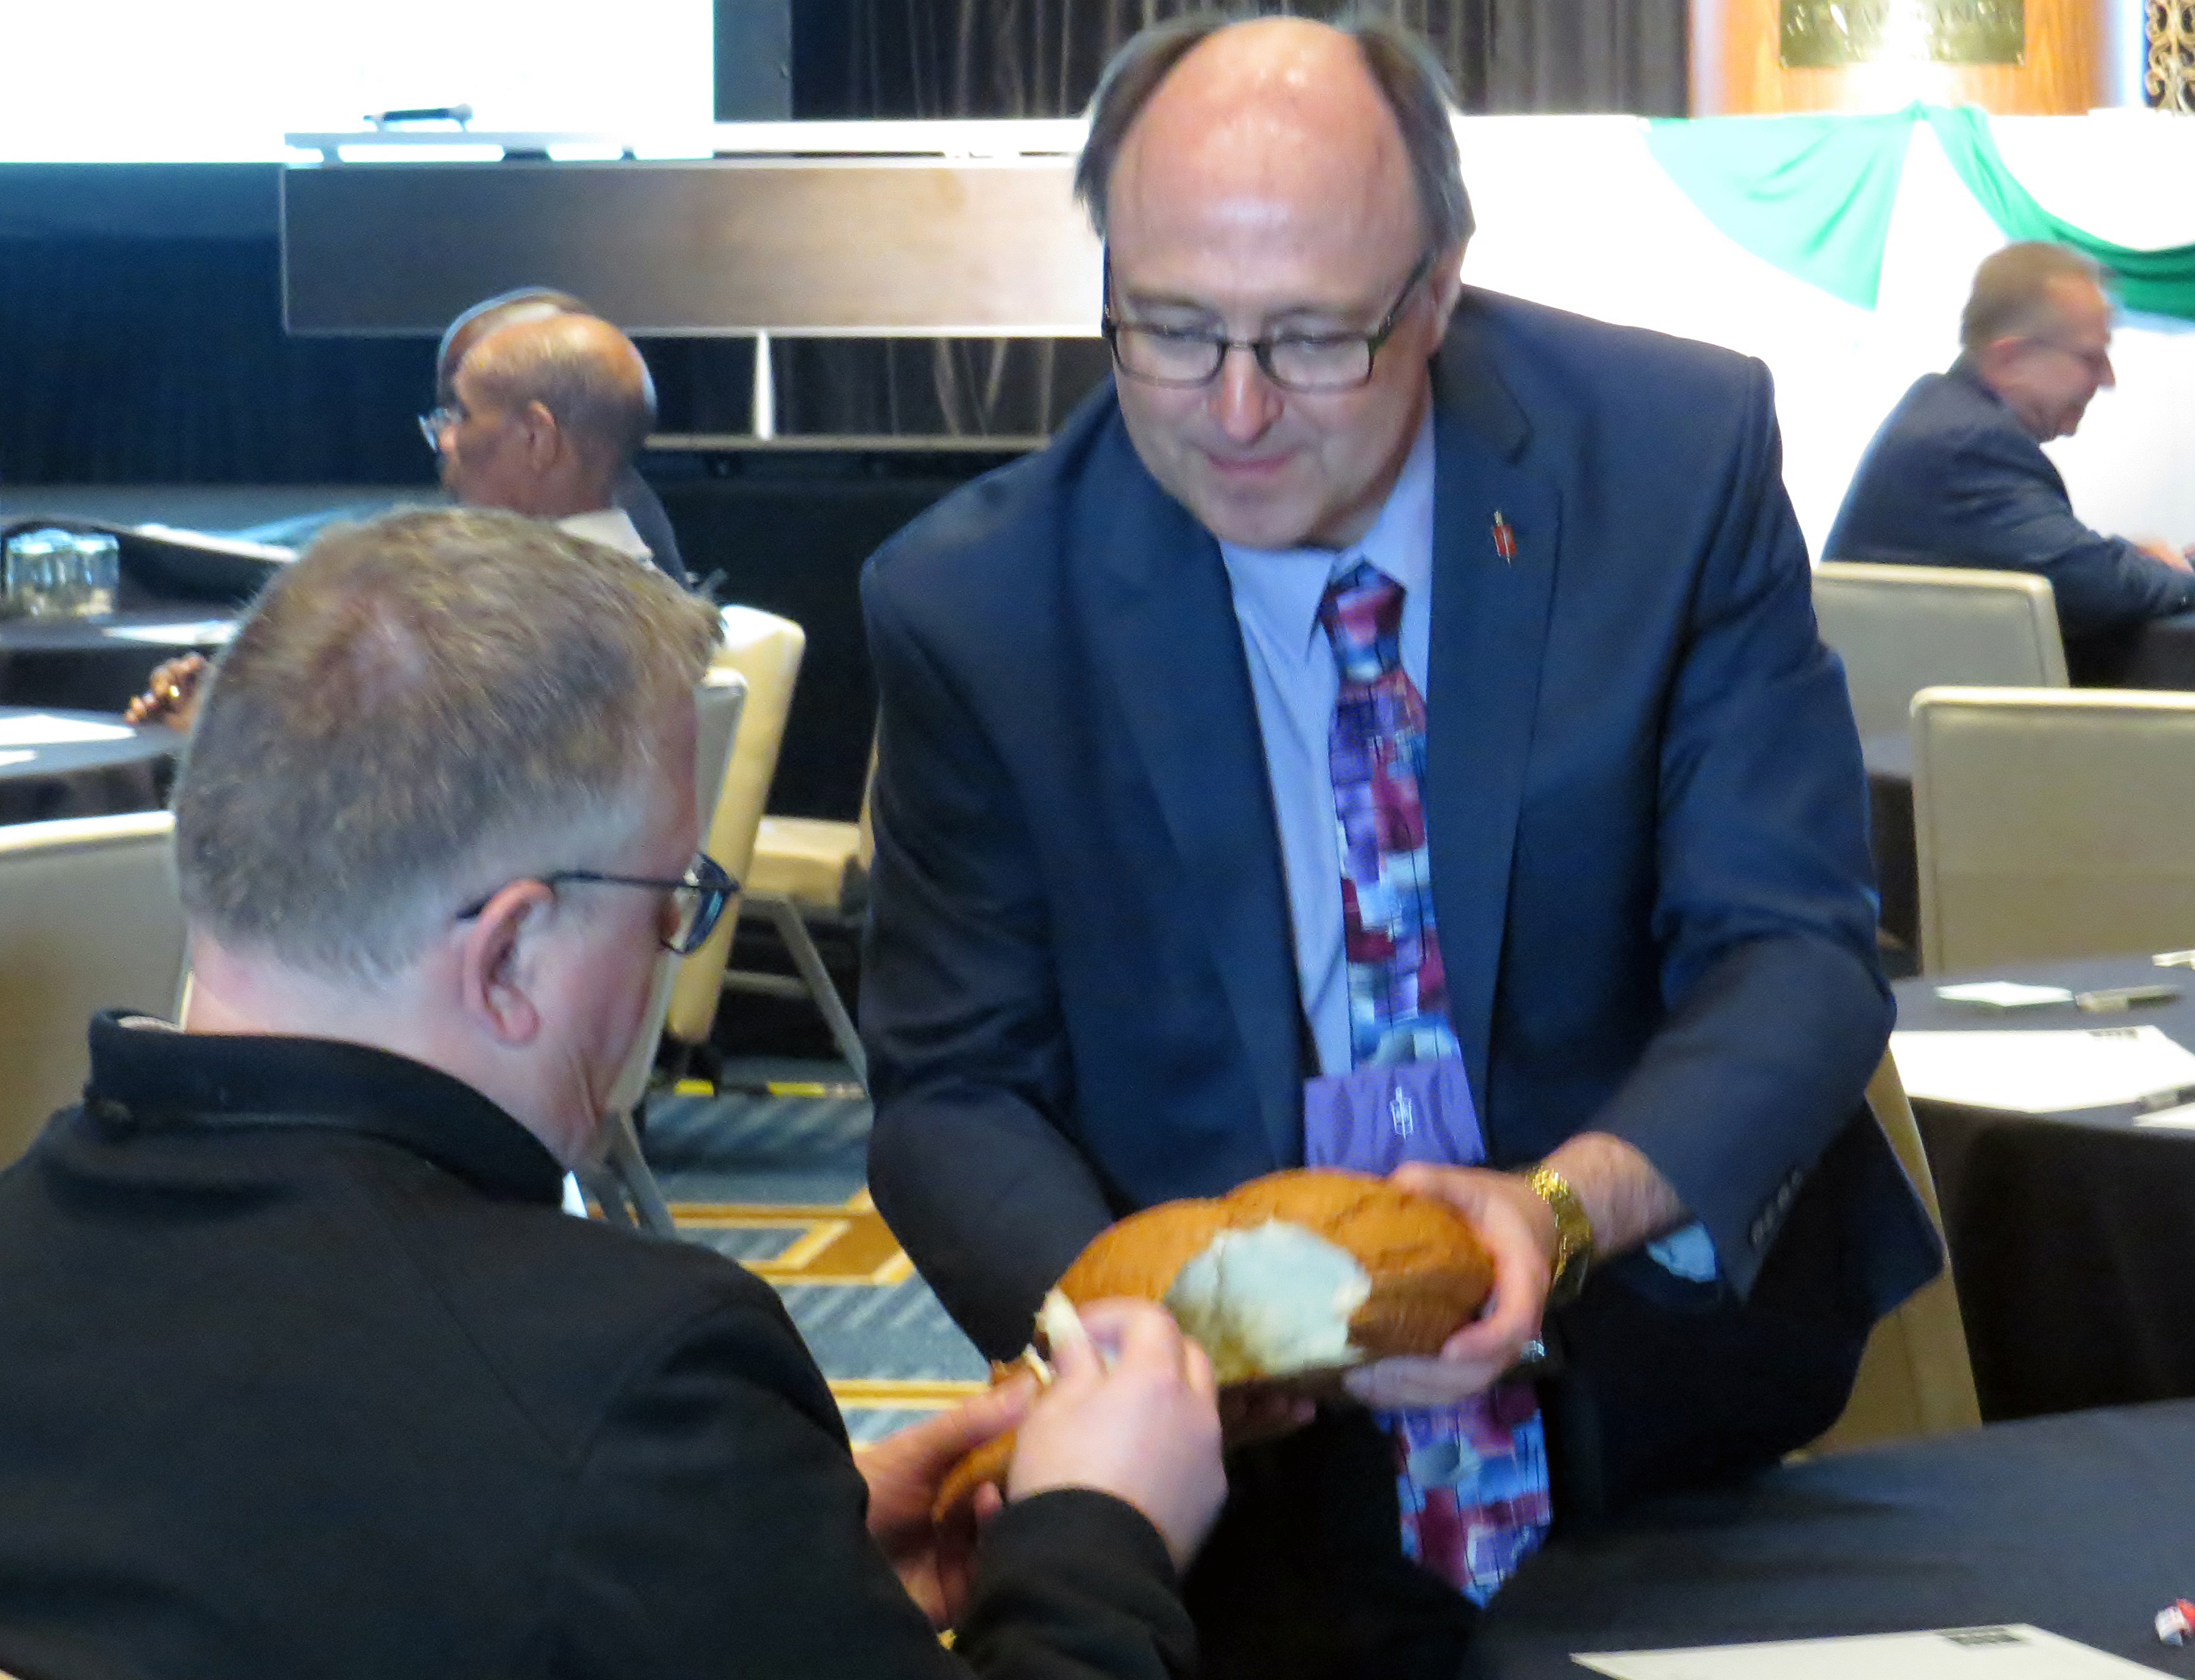 Michigan Area Bishop David Bard serves communion bread to Nordic-Baltic Area Bishop Christian Alsted during closing worship at the meeting of the Council of Bishops. Photo by Sam Hodges, UMNS.